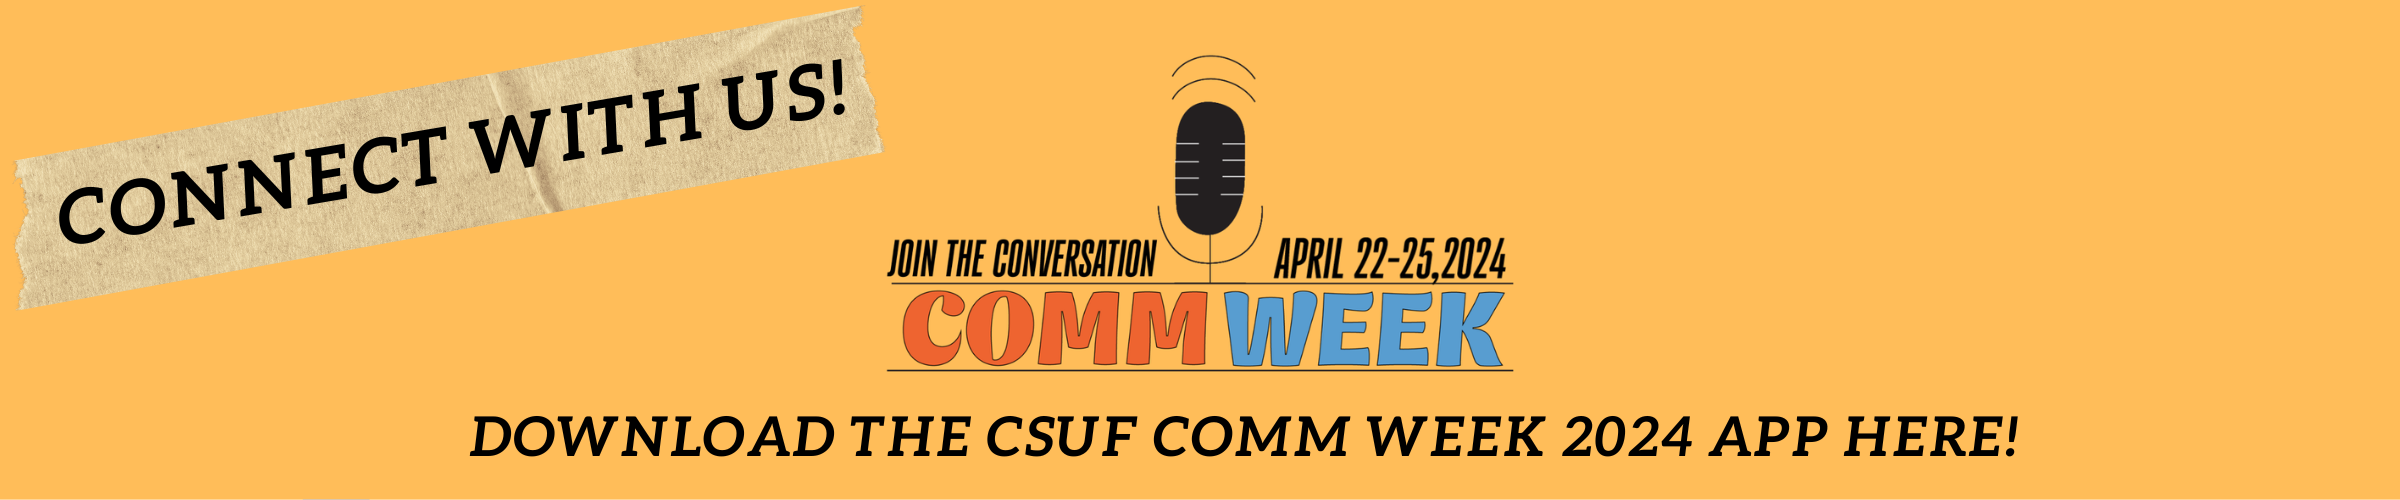 Connect with us! Download the CSUF Comm Week 2024 app here!